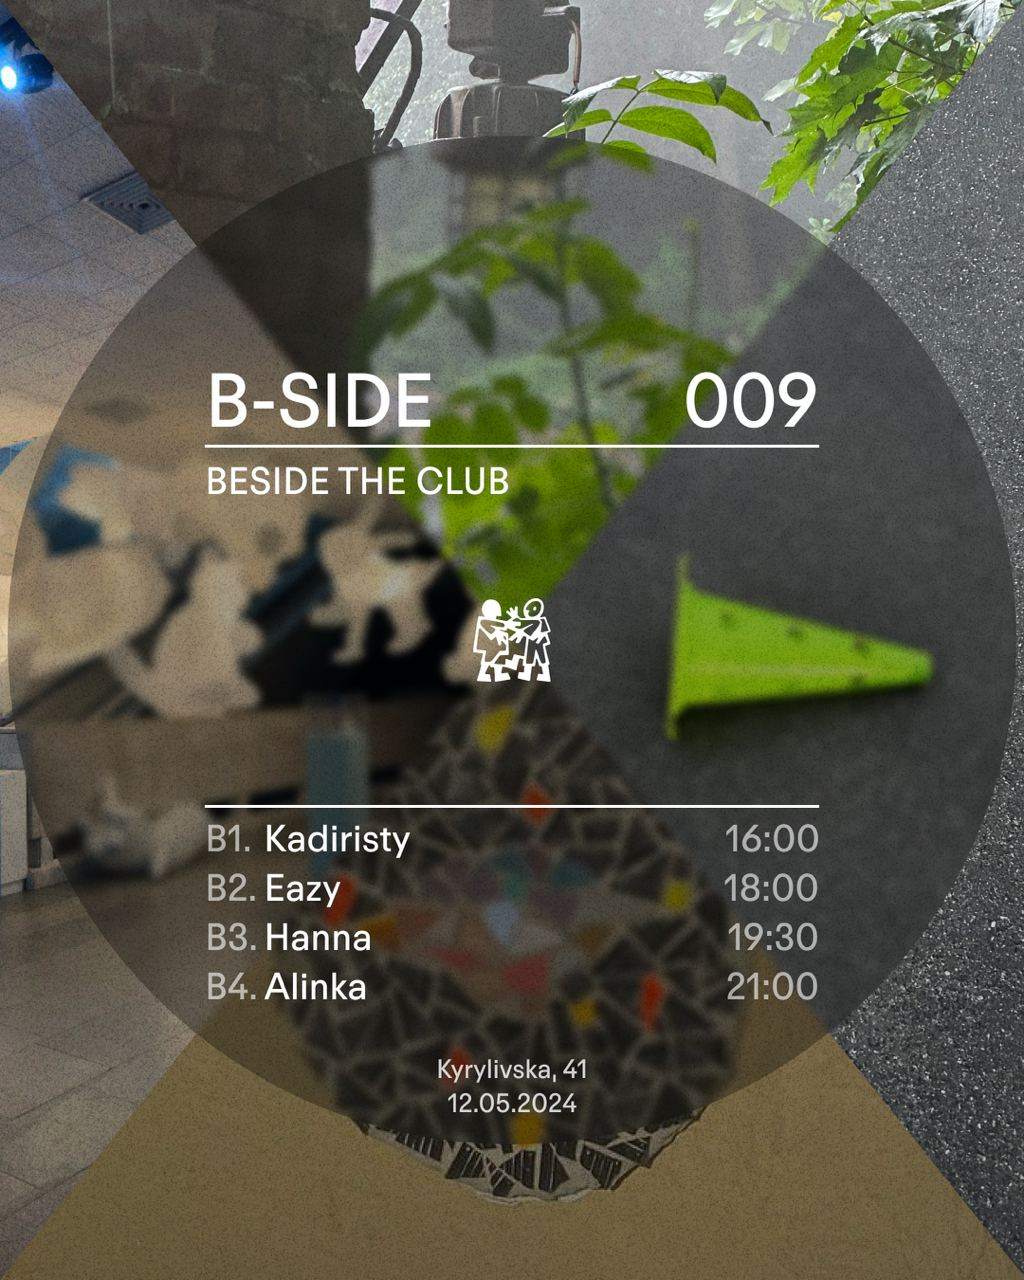 B-SIDE BY ∄ - フライヤー表